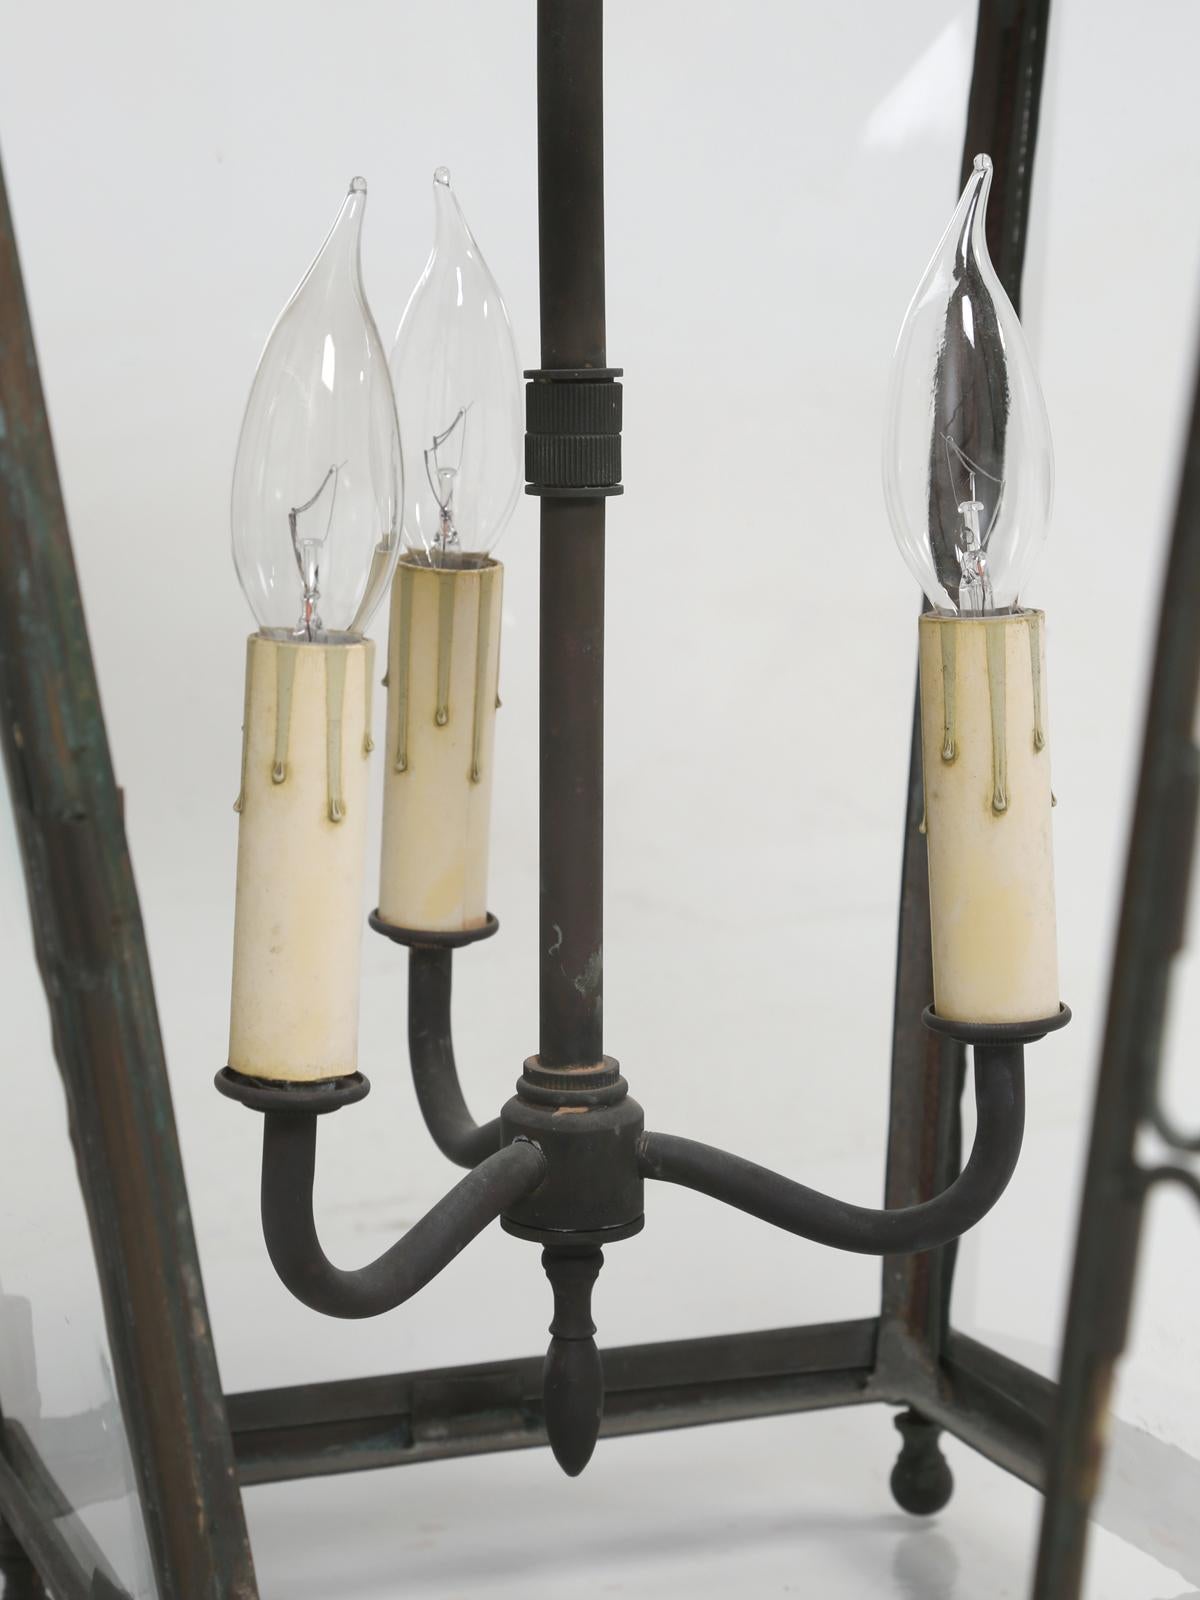 Pair of Old Copper French Lanterns with Wavy Glass Panes, Rewired 7